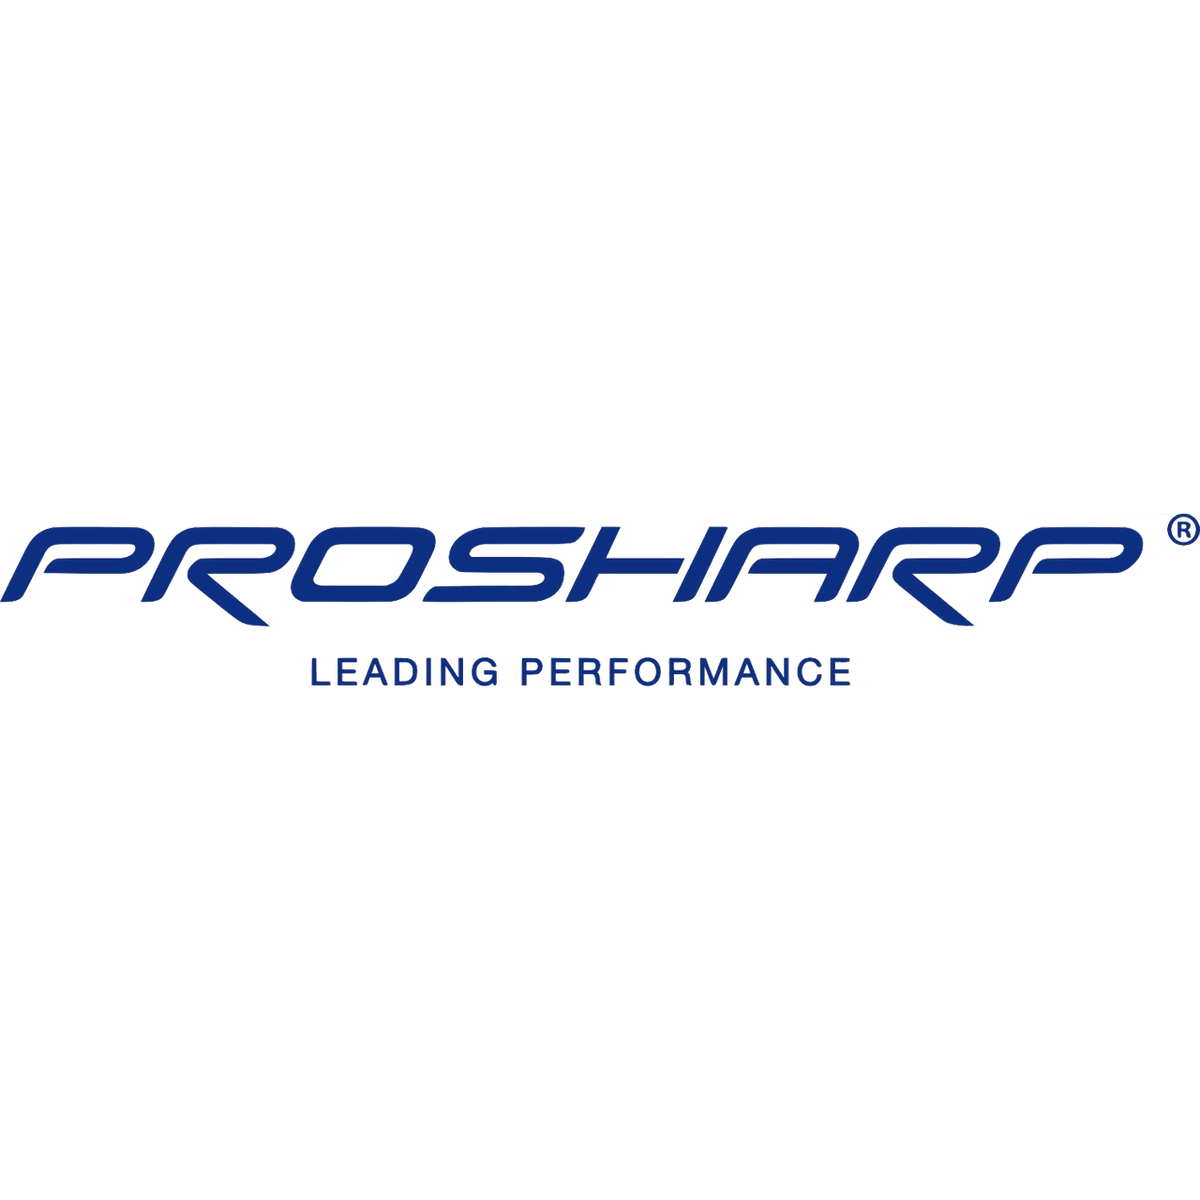 Prosharp Profiling | Mail in Service or Visit In-Store